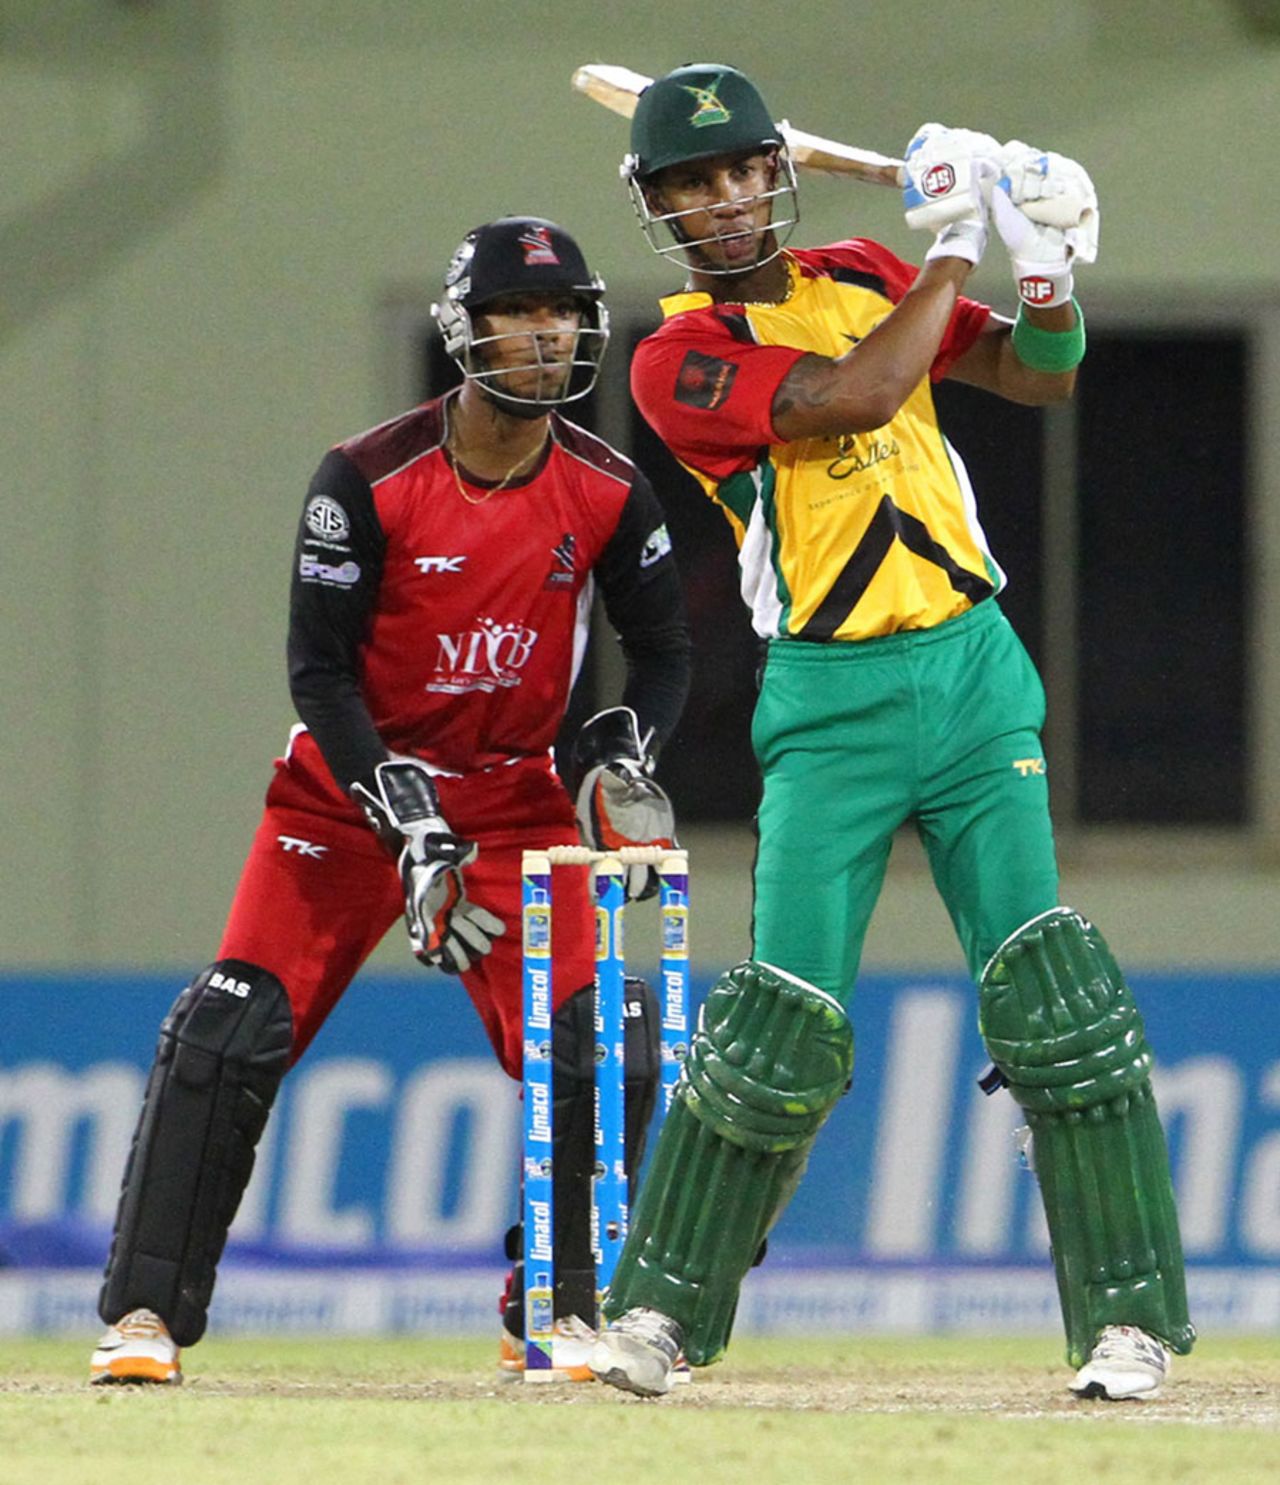 Lendl Simmons hits off the back foot through the leg side, Guyana Amazon Warriors v Trinidad & Tobago Red Steel, Caribbean Premier League 2013, Providence, July 31, 2013